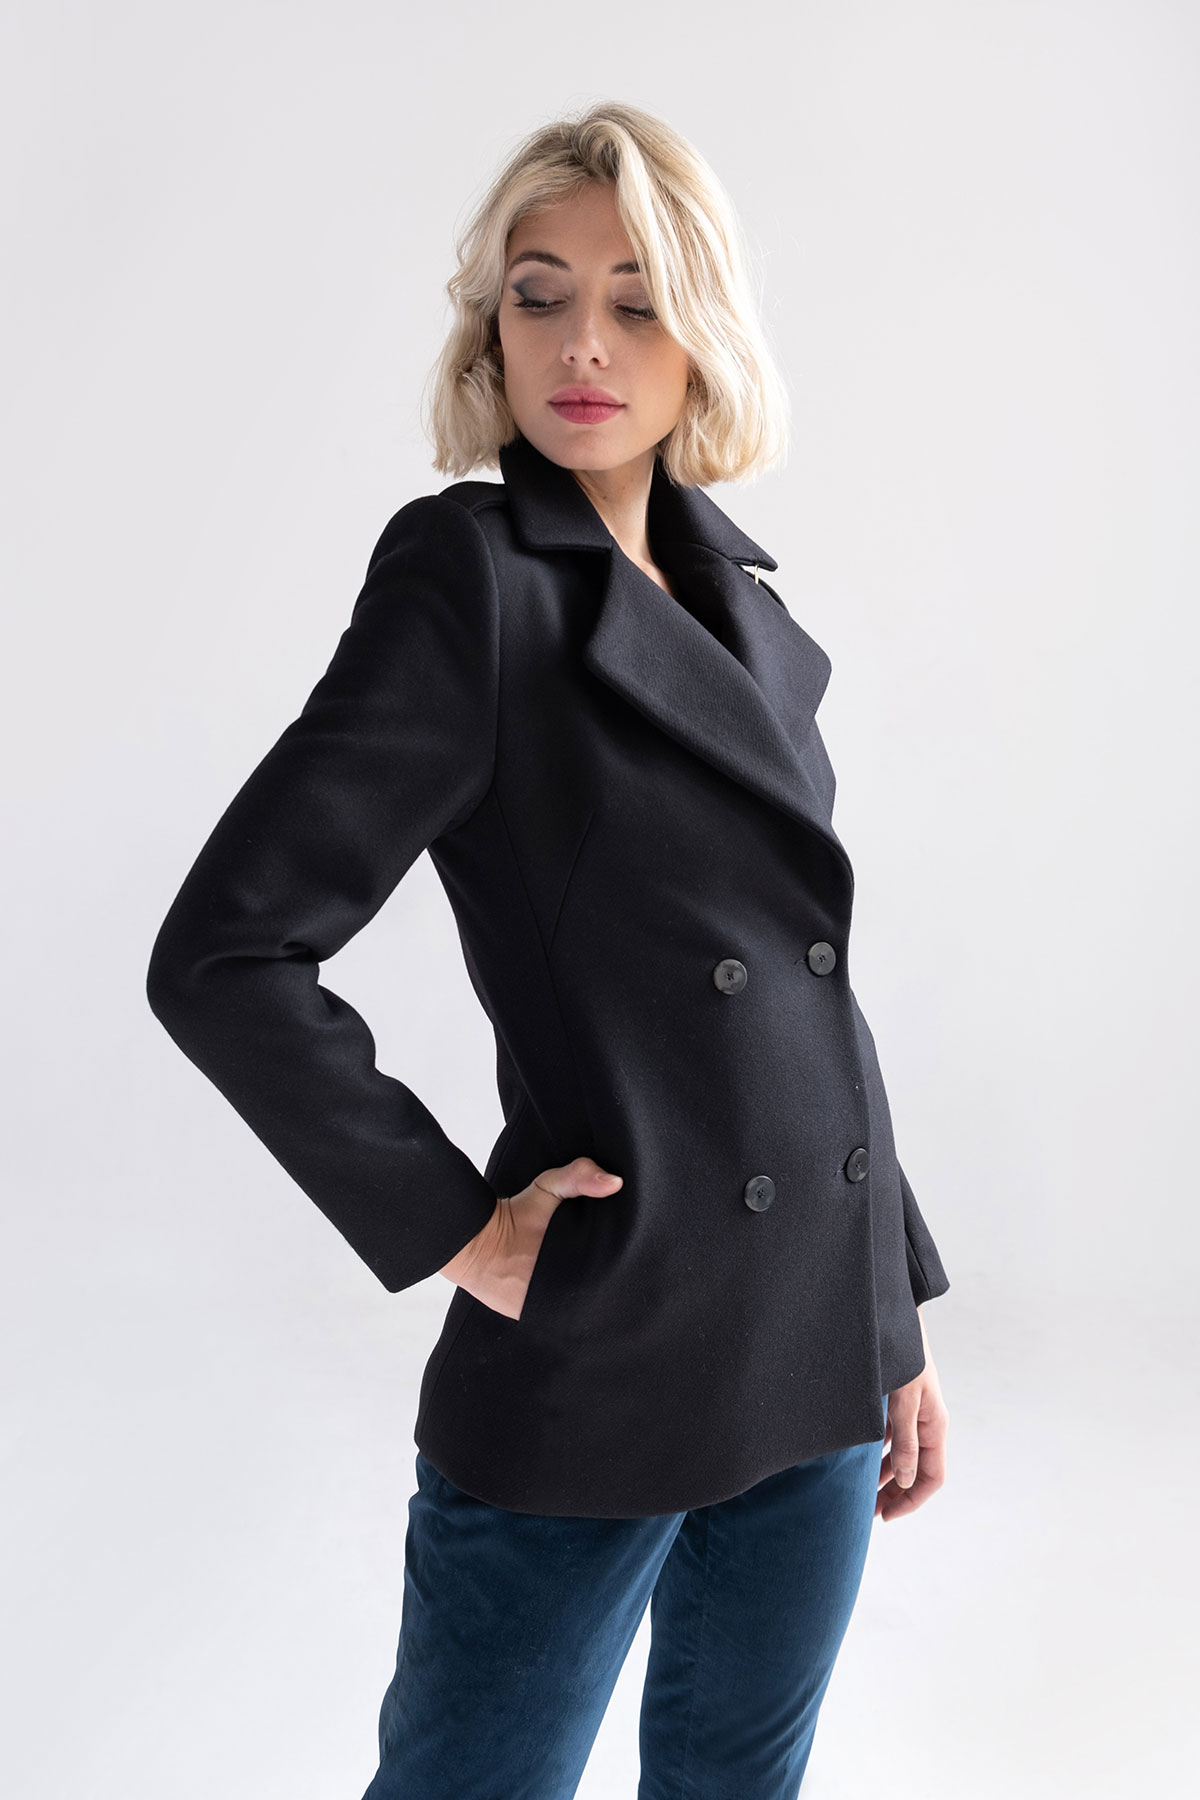 black recycled wool double-breasted jacket - Baluard Barcelona